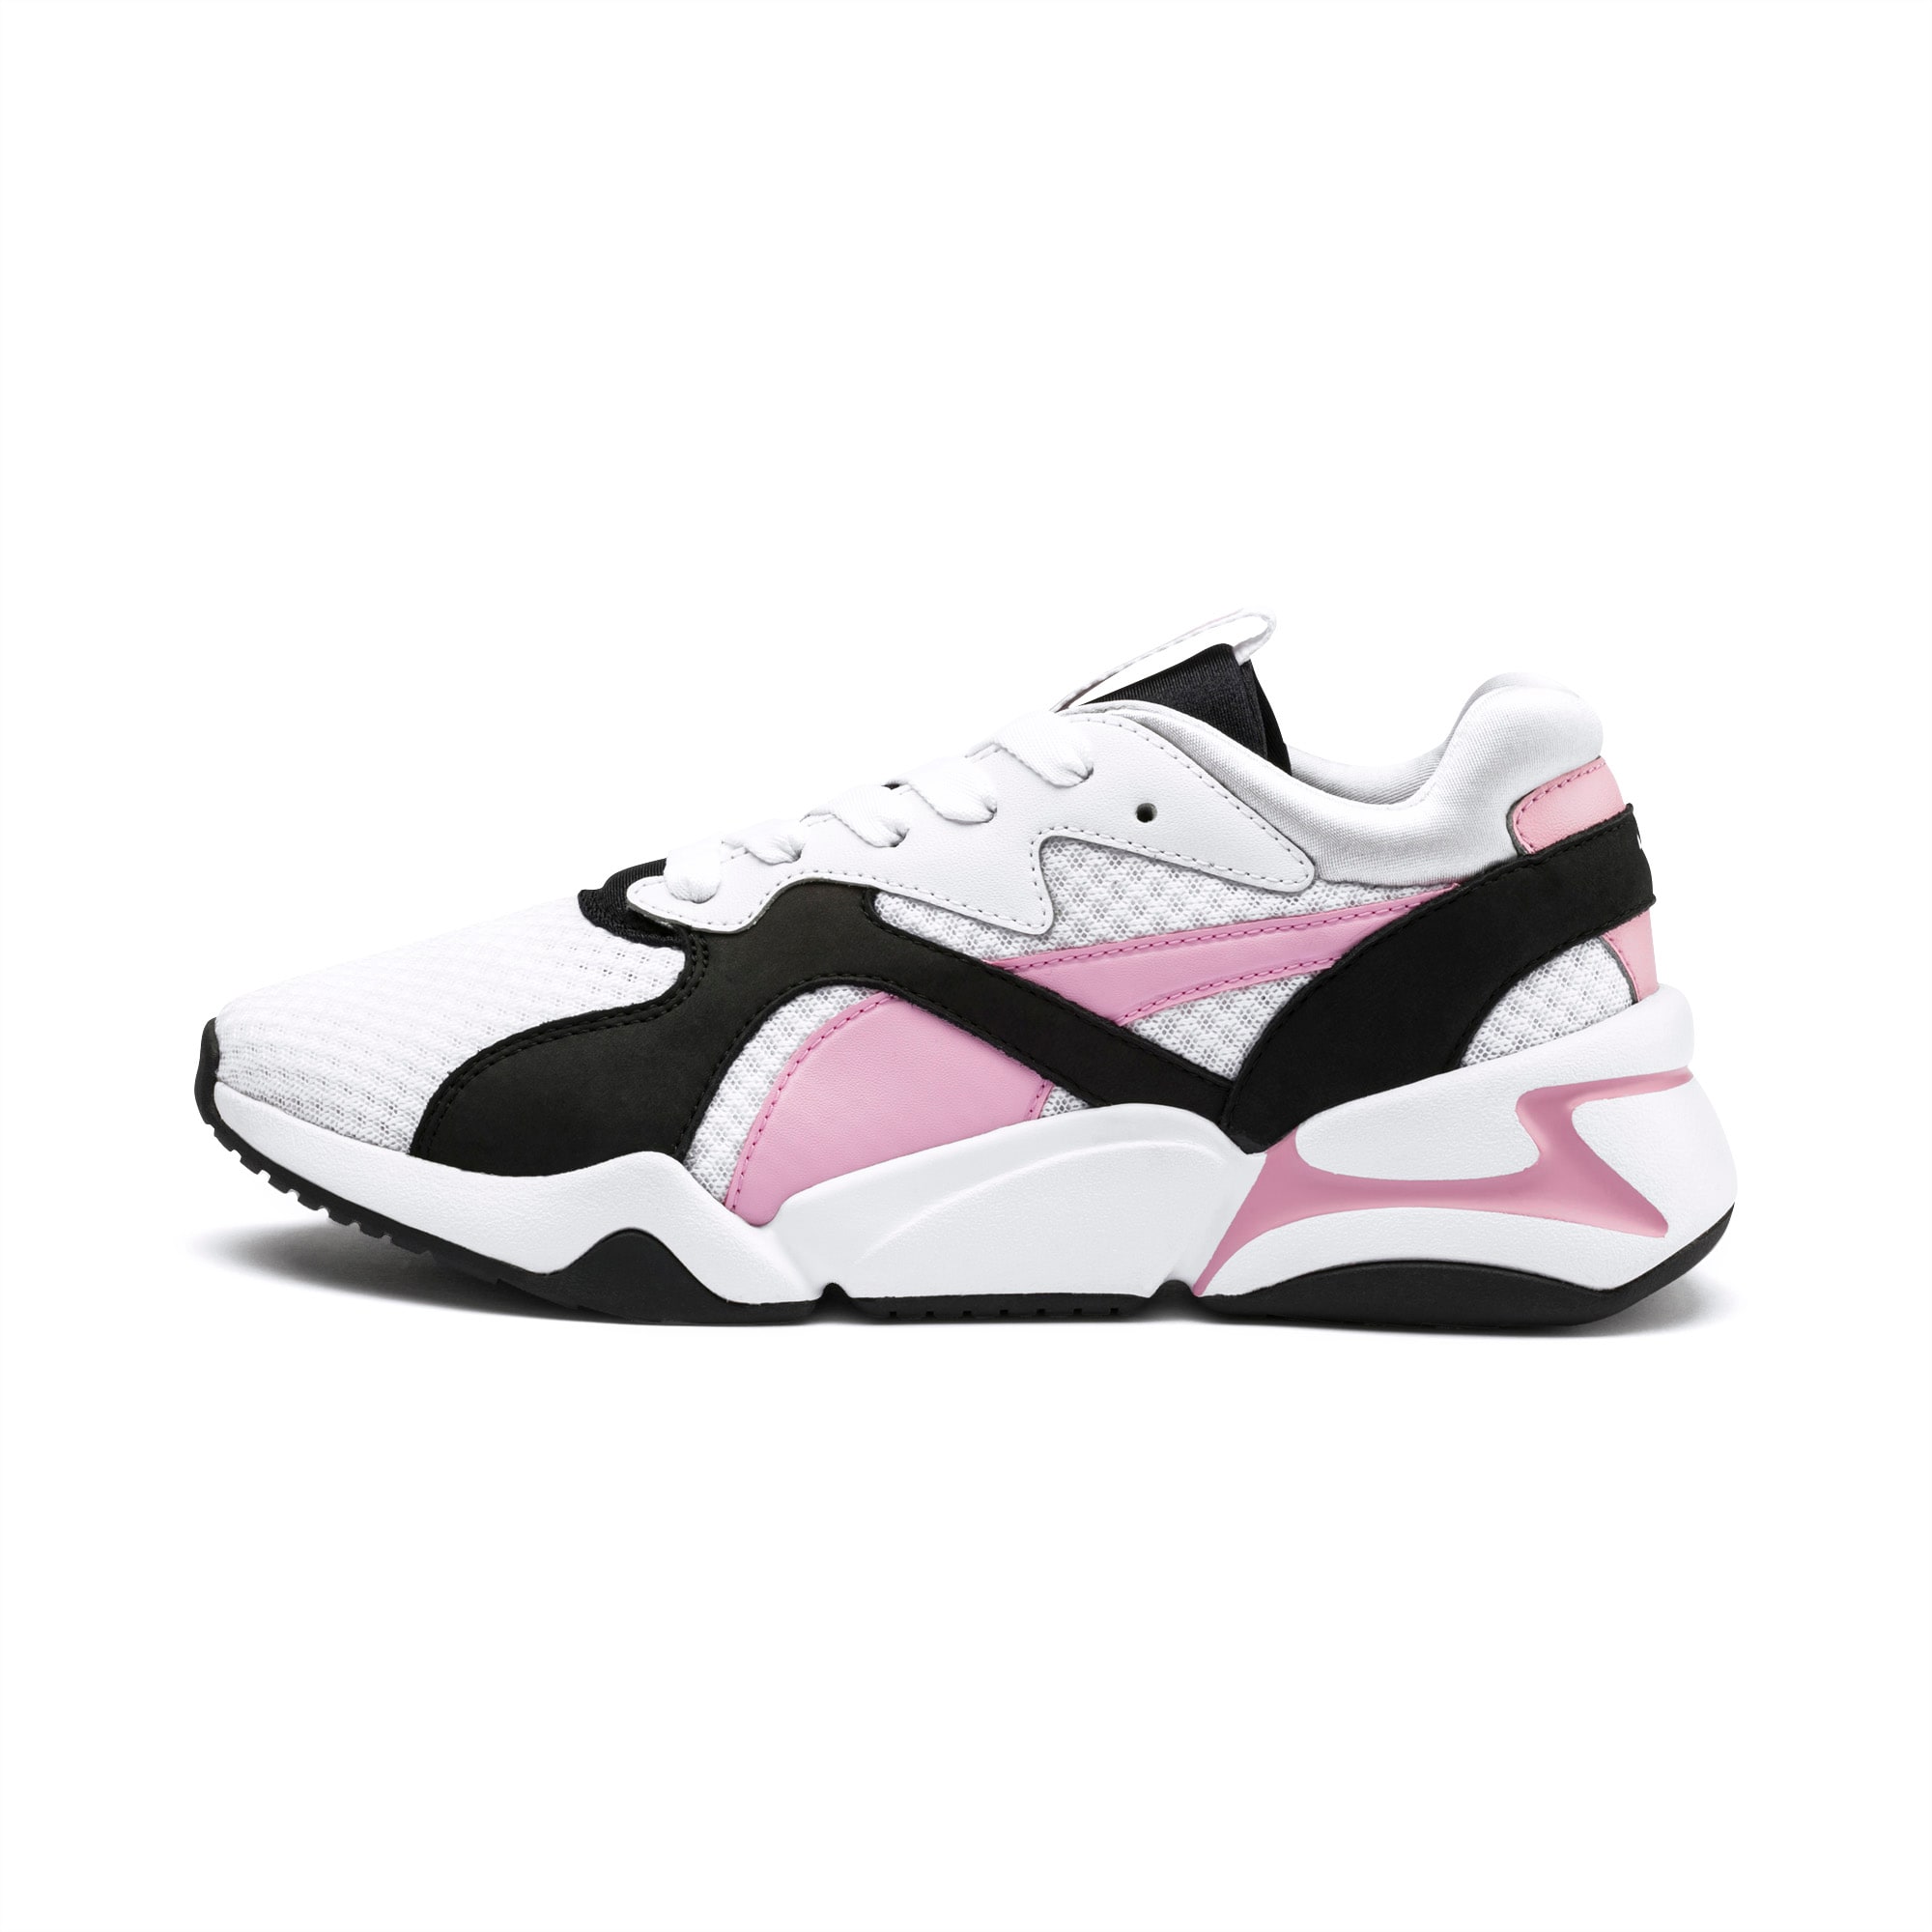 pink and white pumas